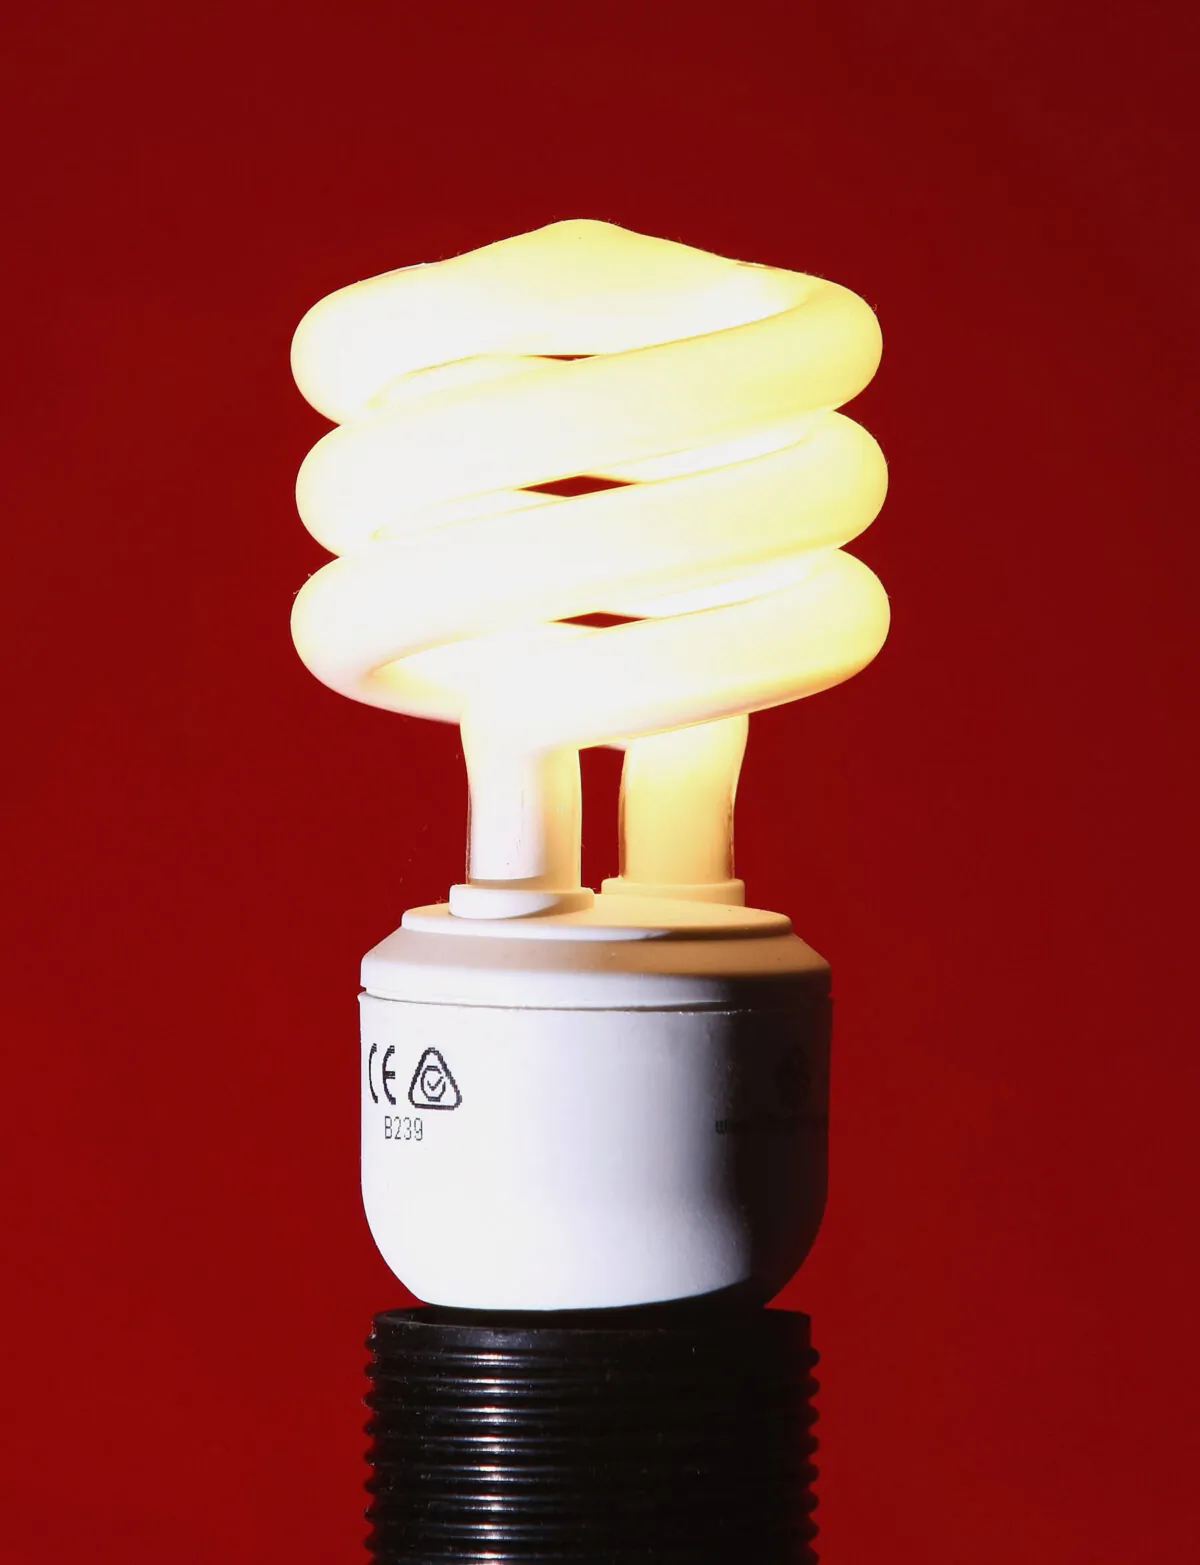 A Compact Fluorescent Bulb (CFL) is seen illuminated in Sydney, Australia, on June 4, 2007. (Cameron Spencer/Getty Images)